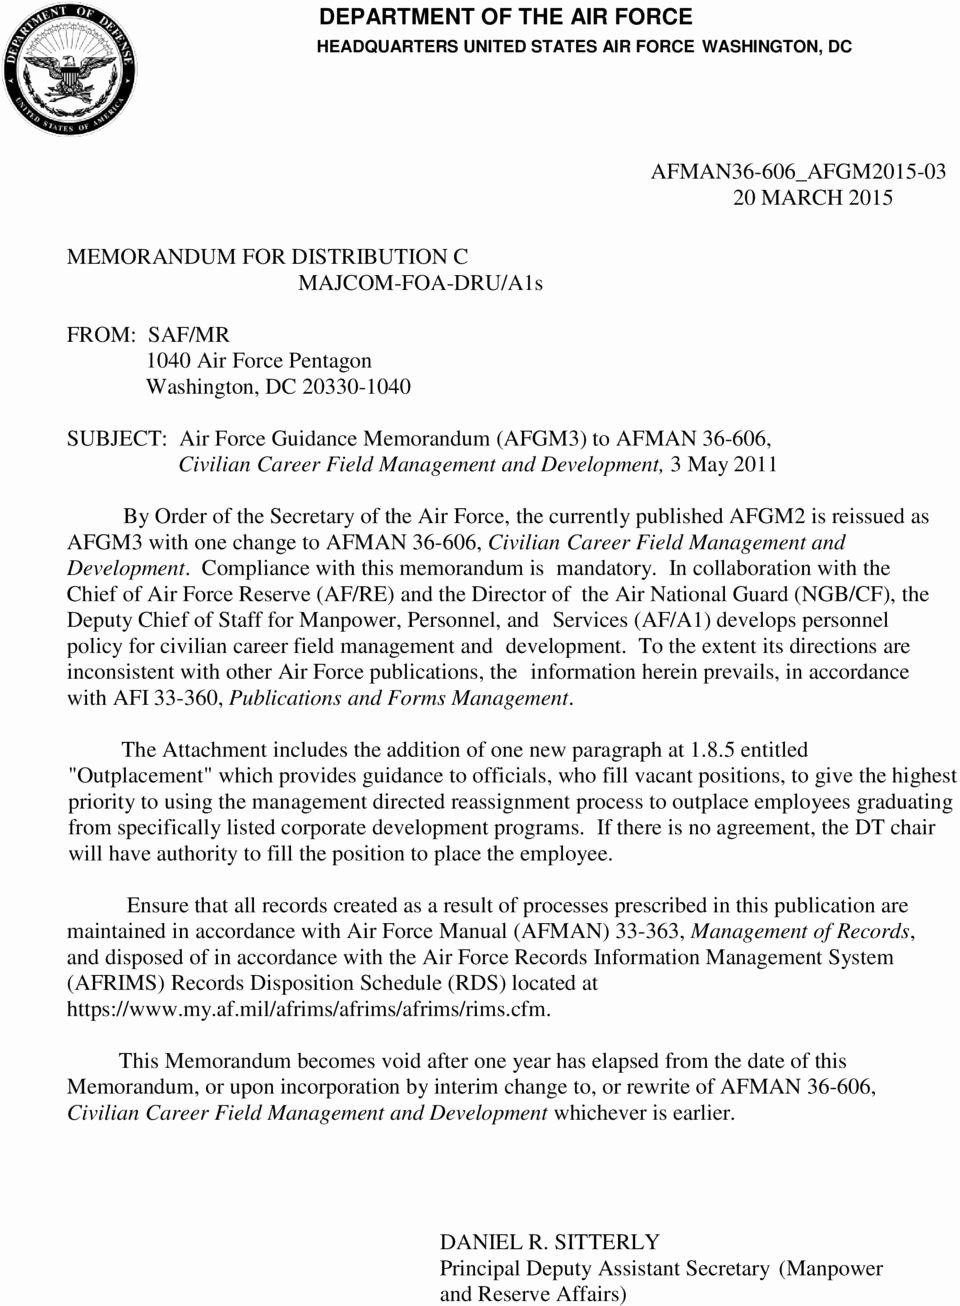 National Interest Waiver Recommendation Letter Unique Department Of the Air force Pdf